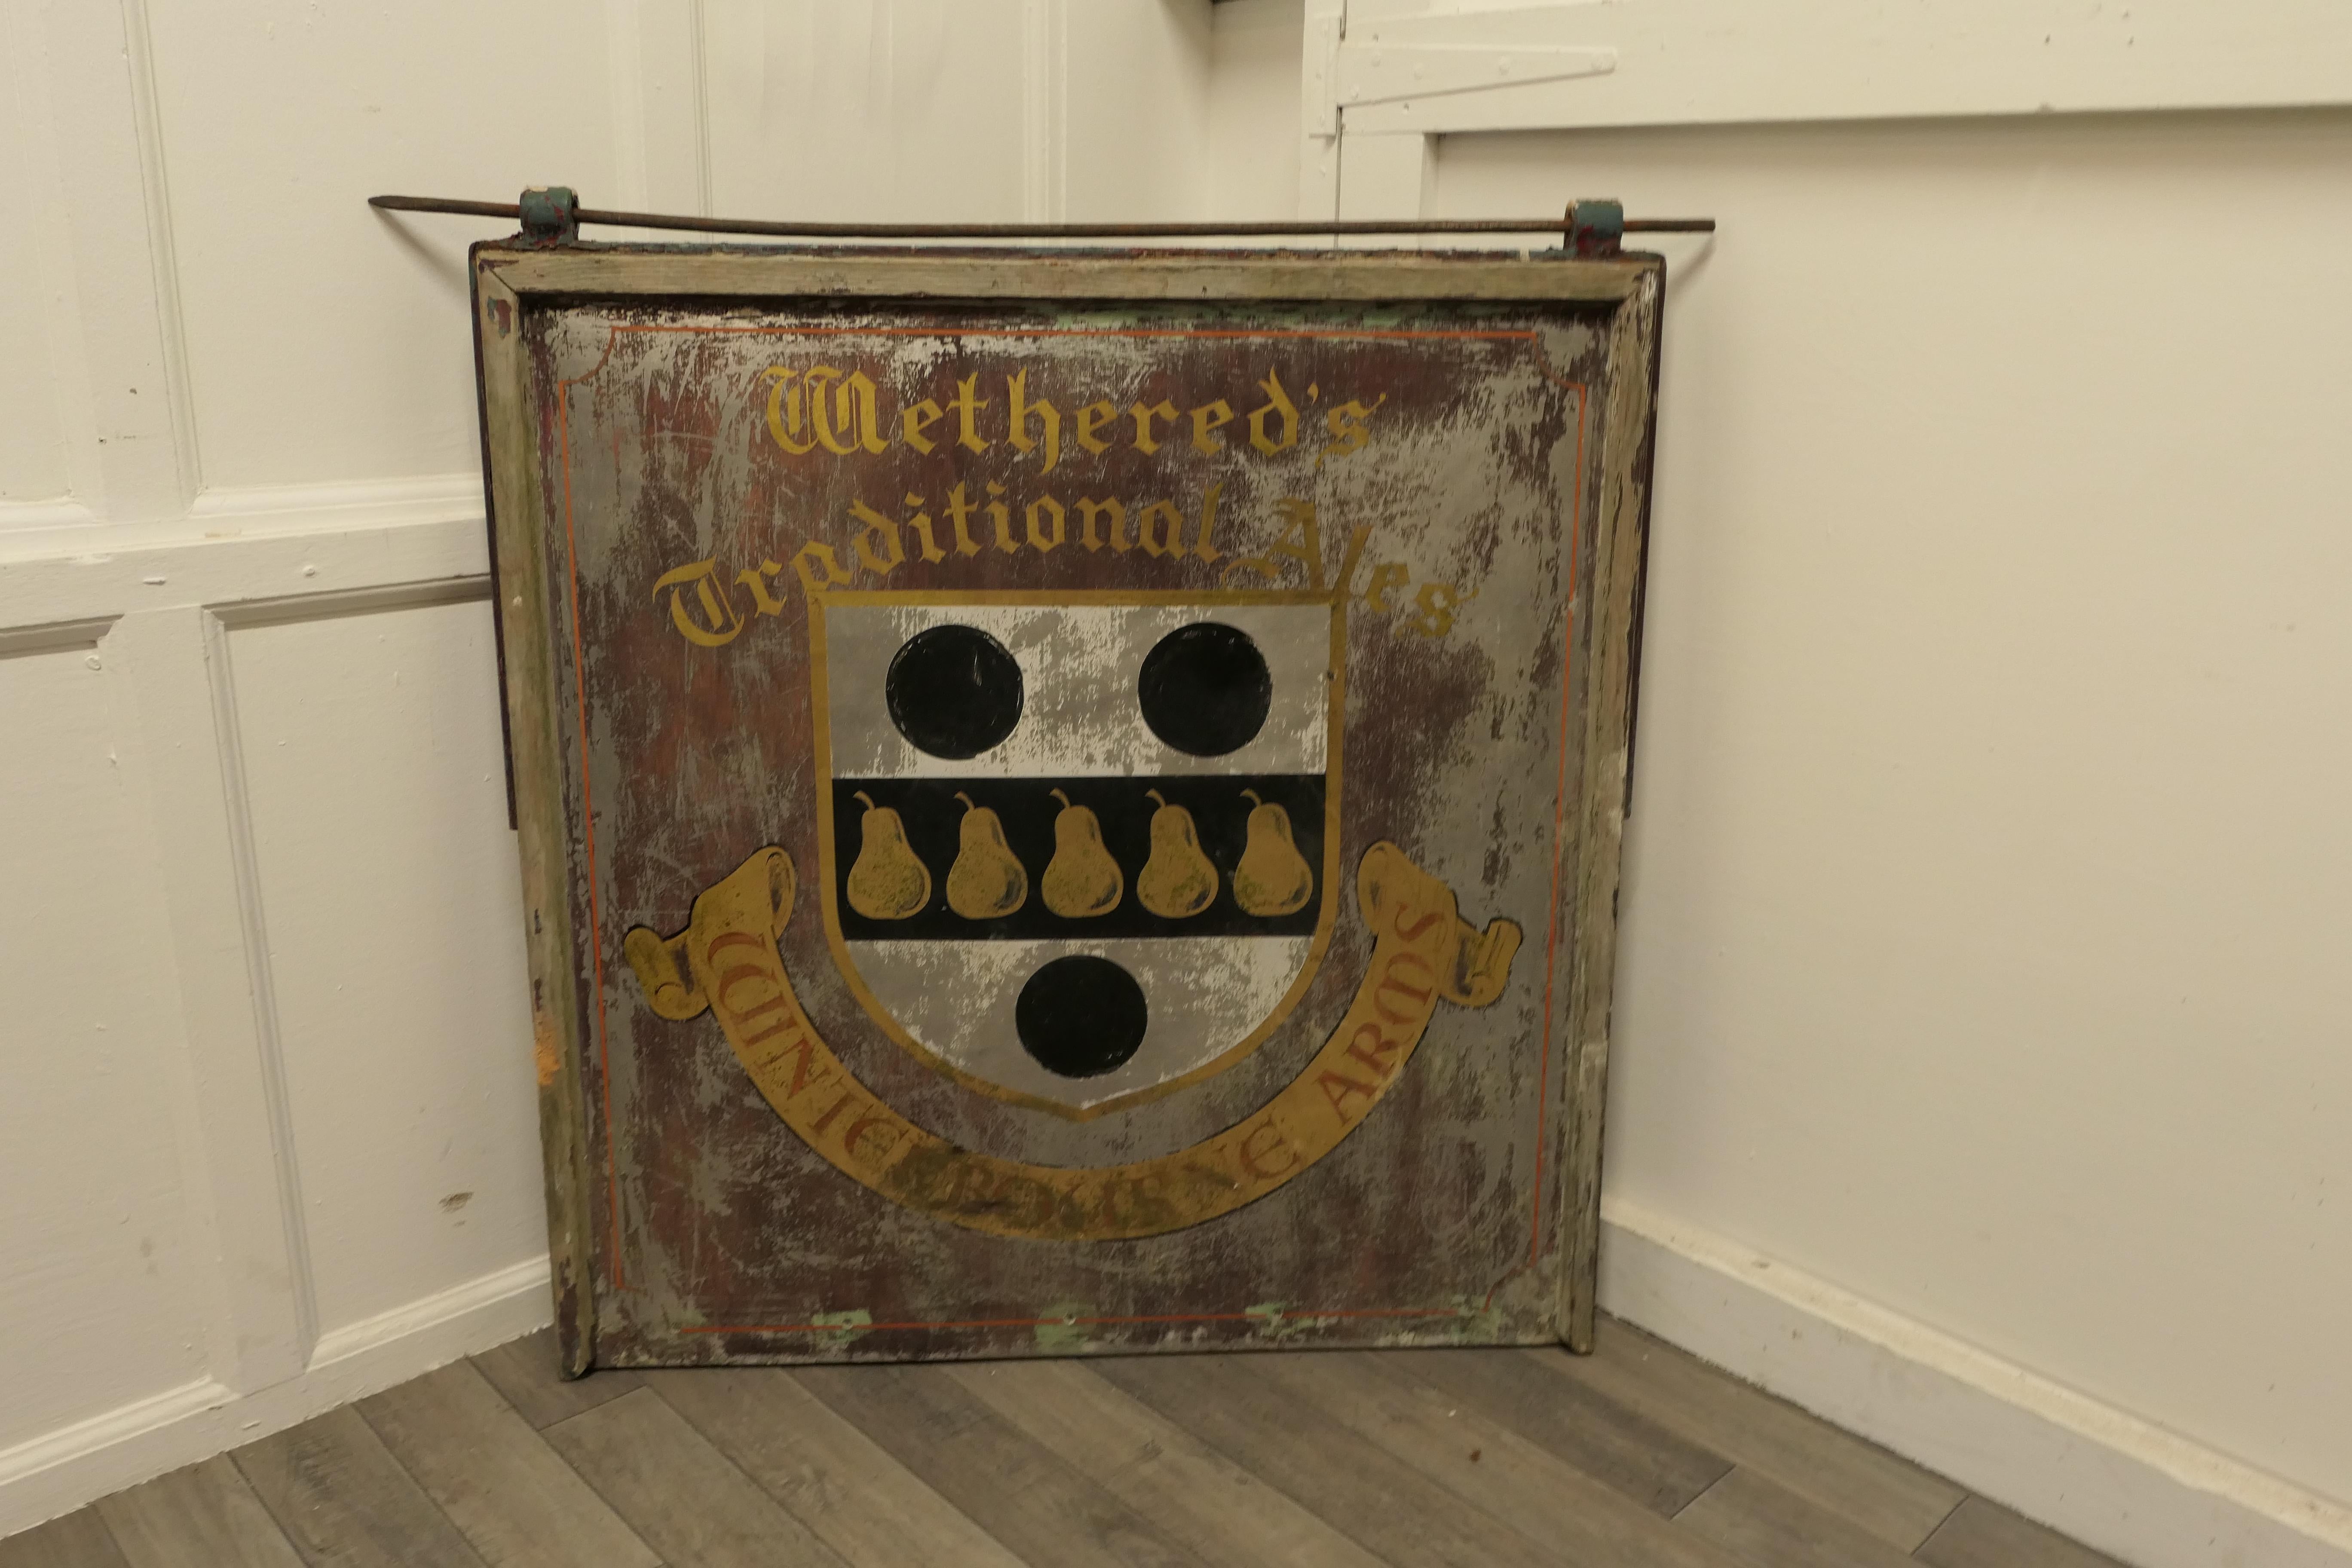 Traditional large hanging pub sign. Wethered’s winterbourne arms

This is a large and heavy piece dating from the first half of the 20th Century, it is double sided though the paint on one side is rather worn, it has fixings on the top of the